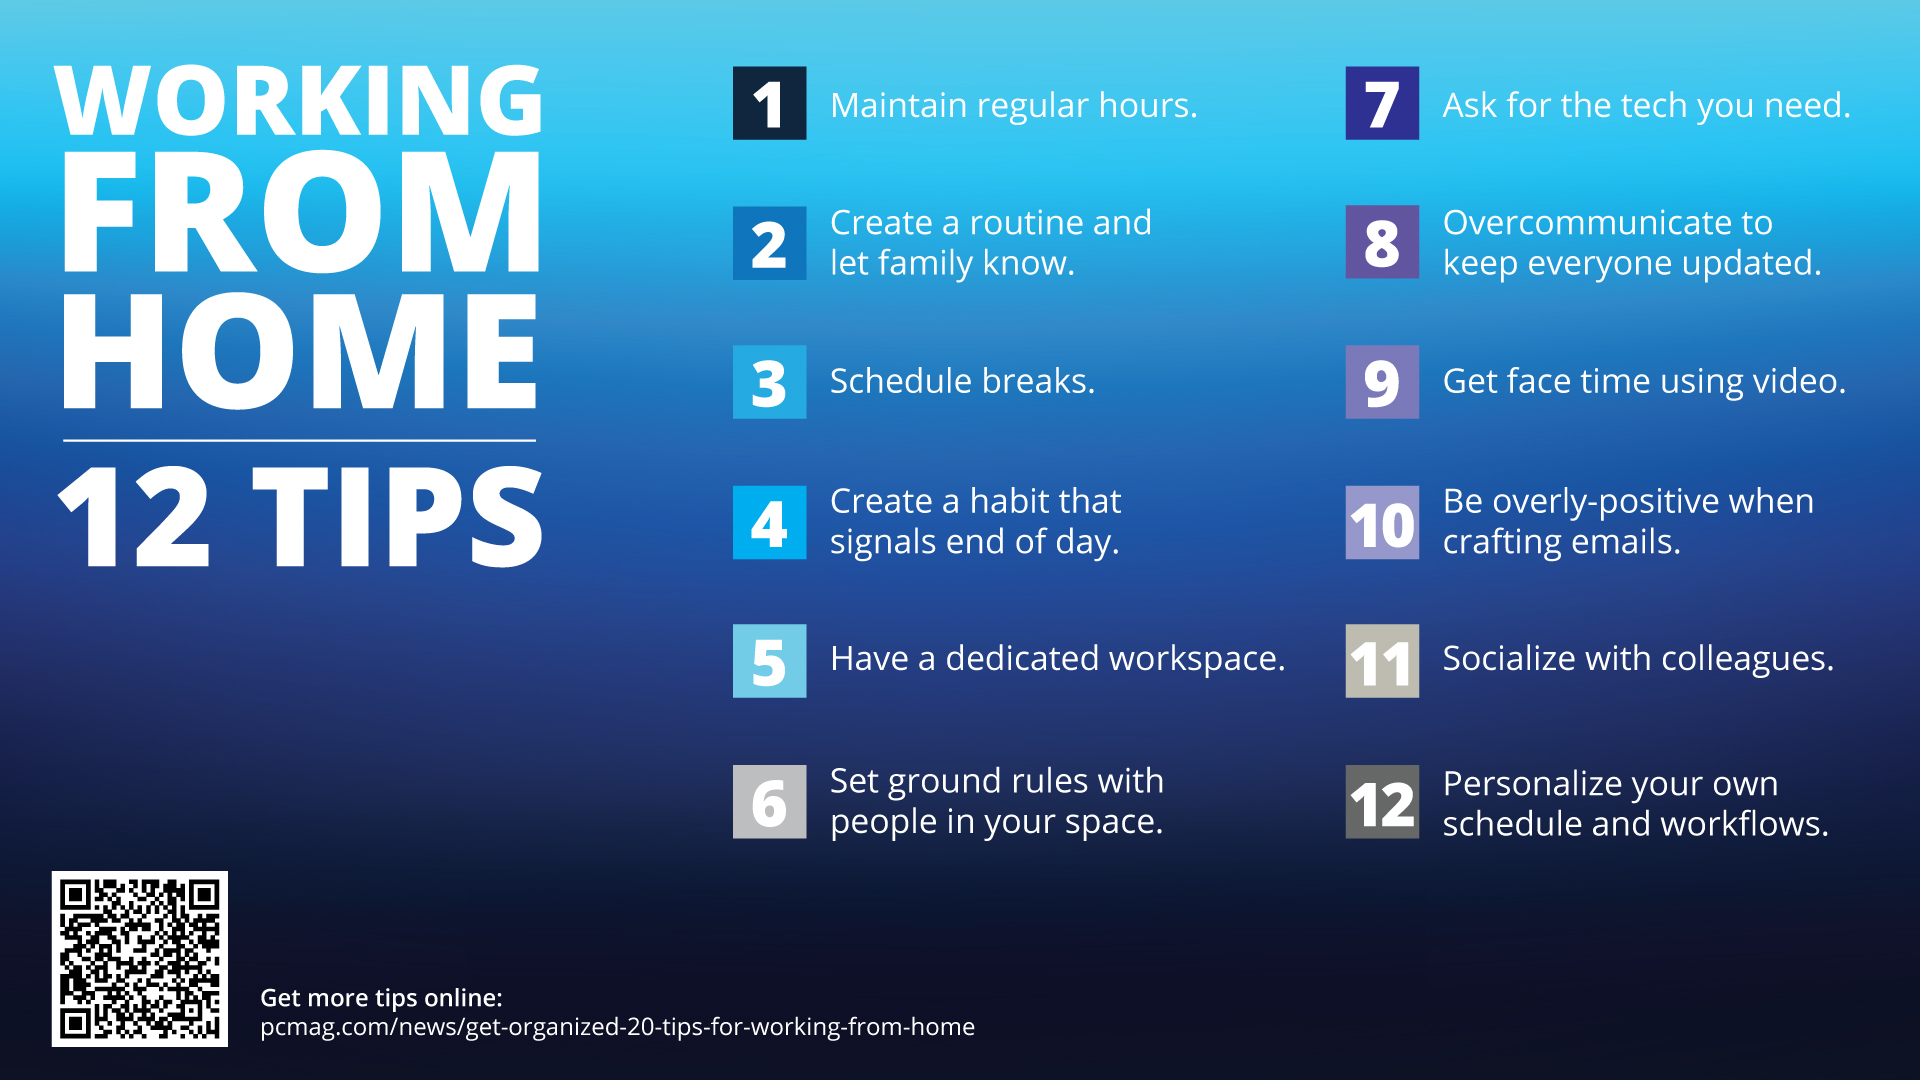 Free Graphic | Work from Home Tips | 12 Tips